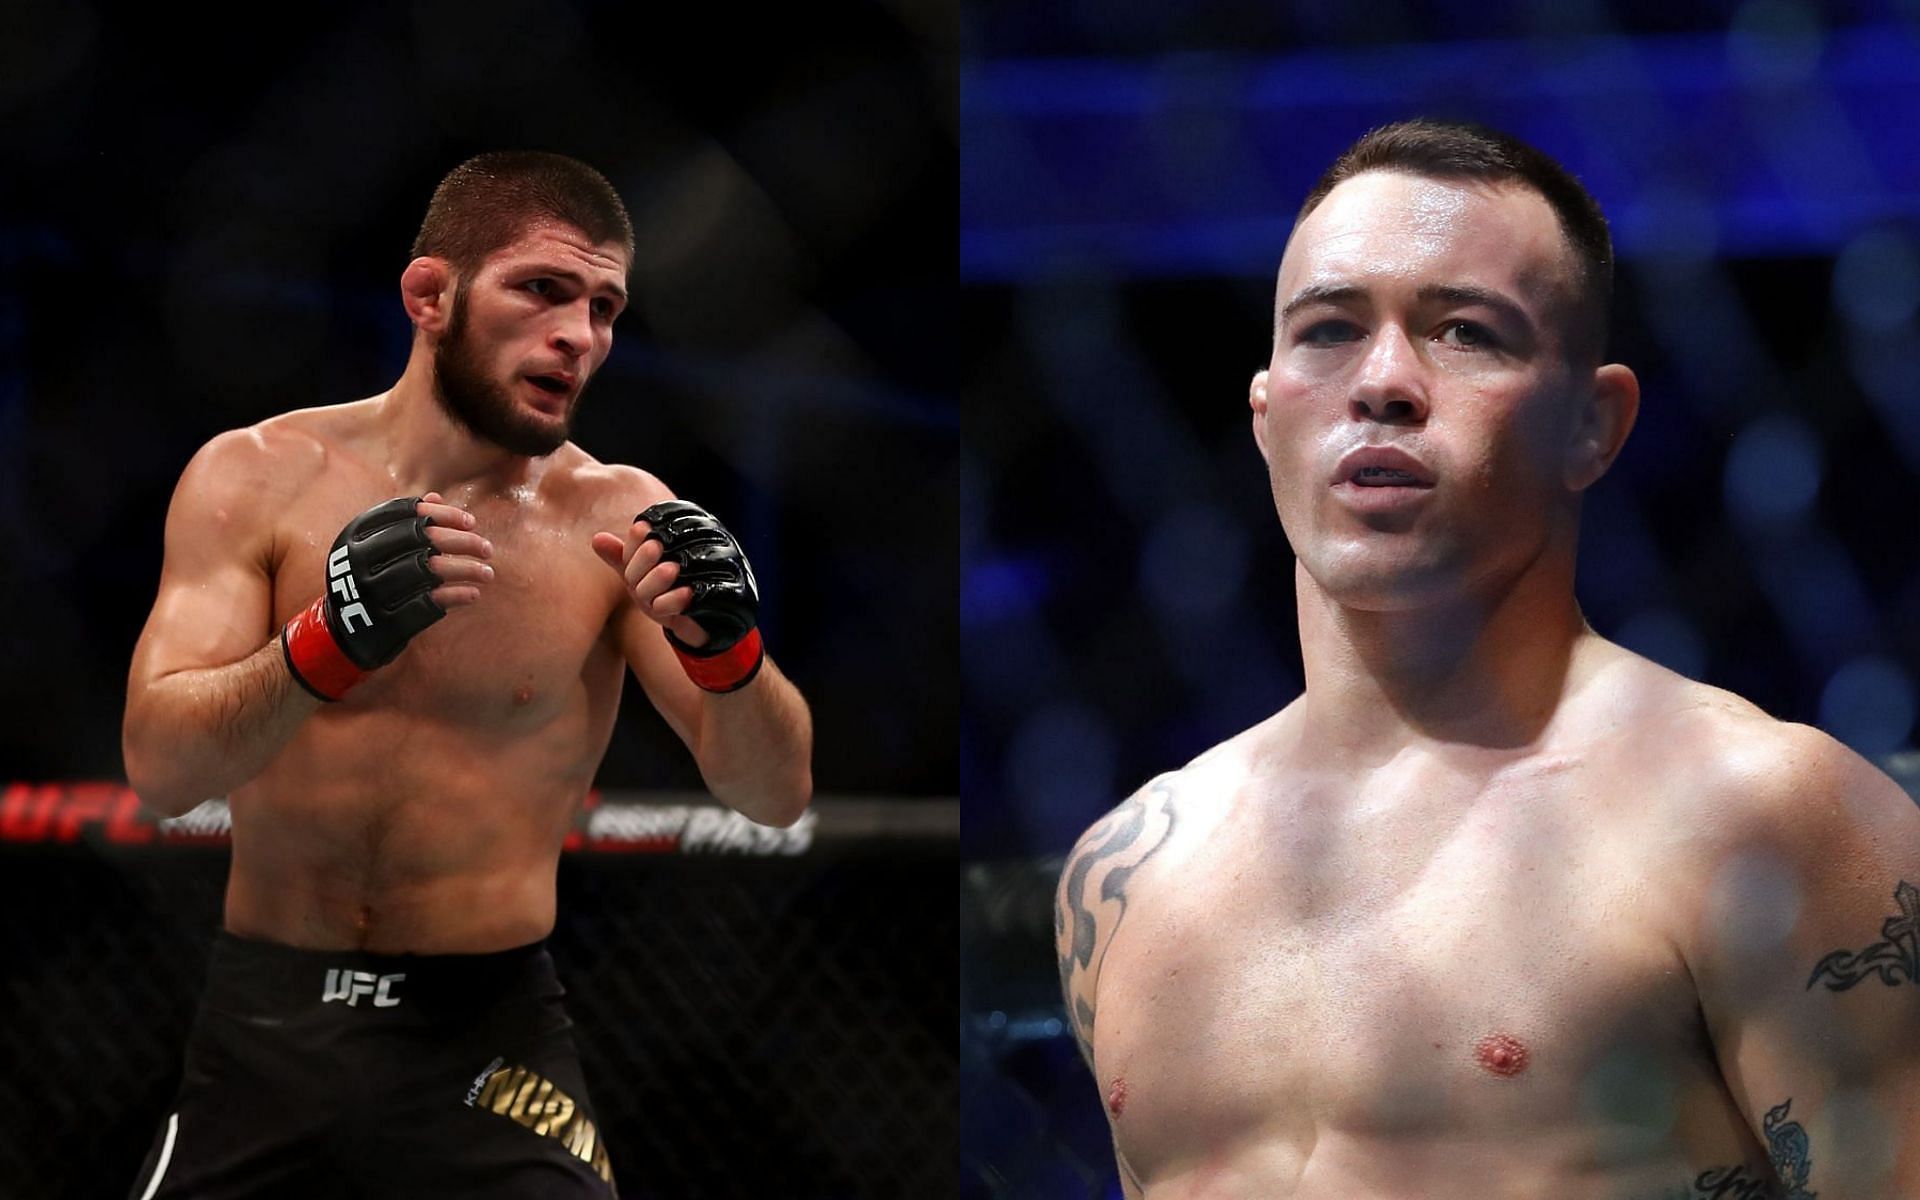 Colby Covington and Khabib Nurmagomedov have landed the same number of takedowns in 13 UFC fights